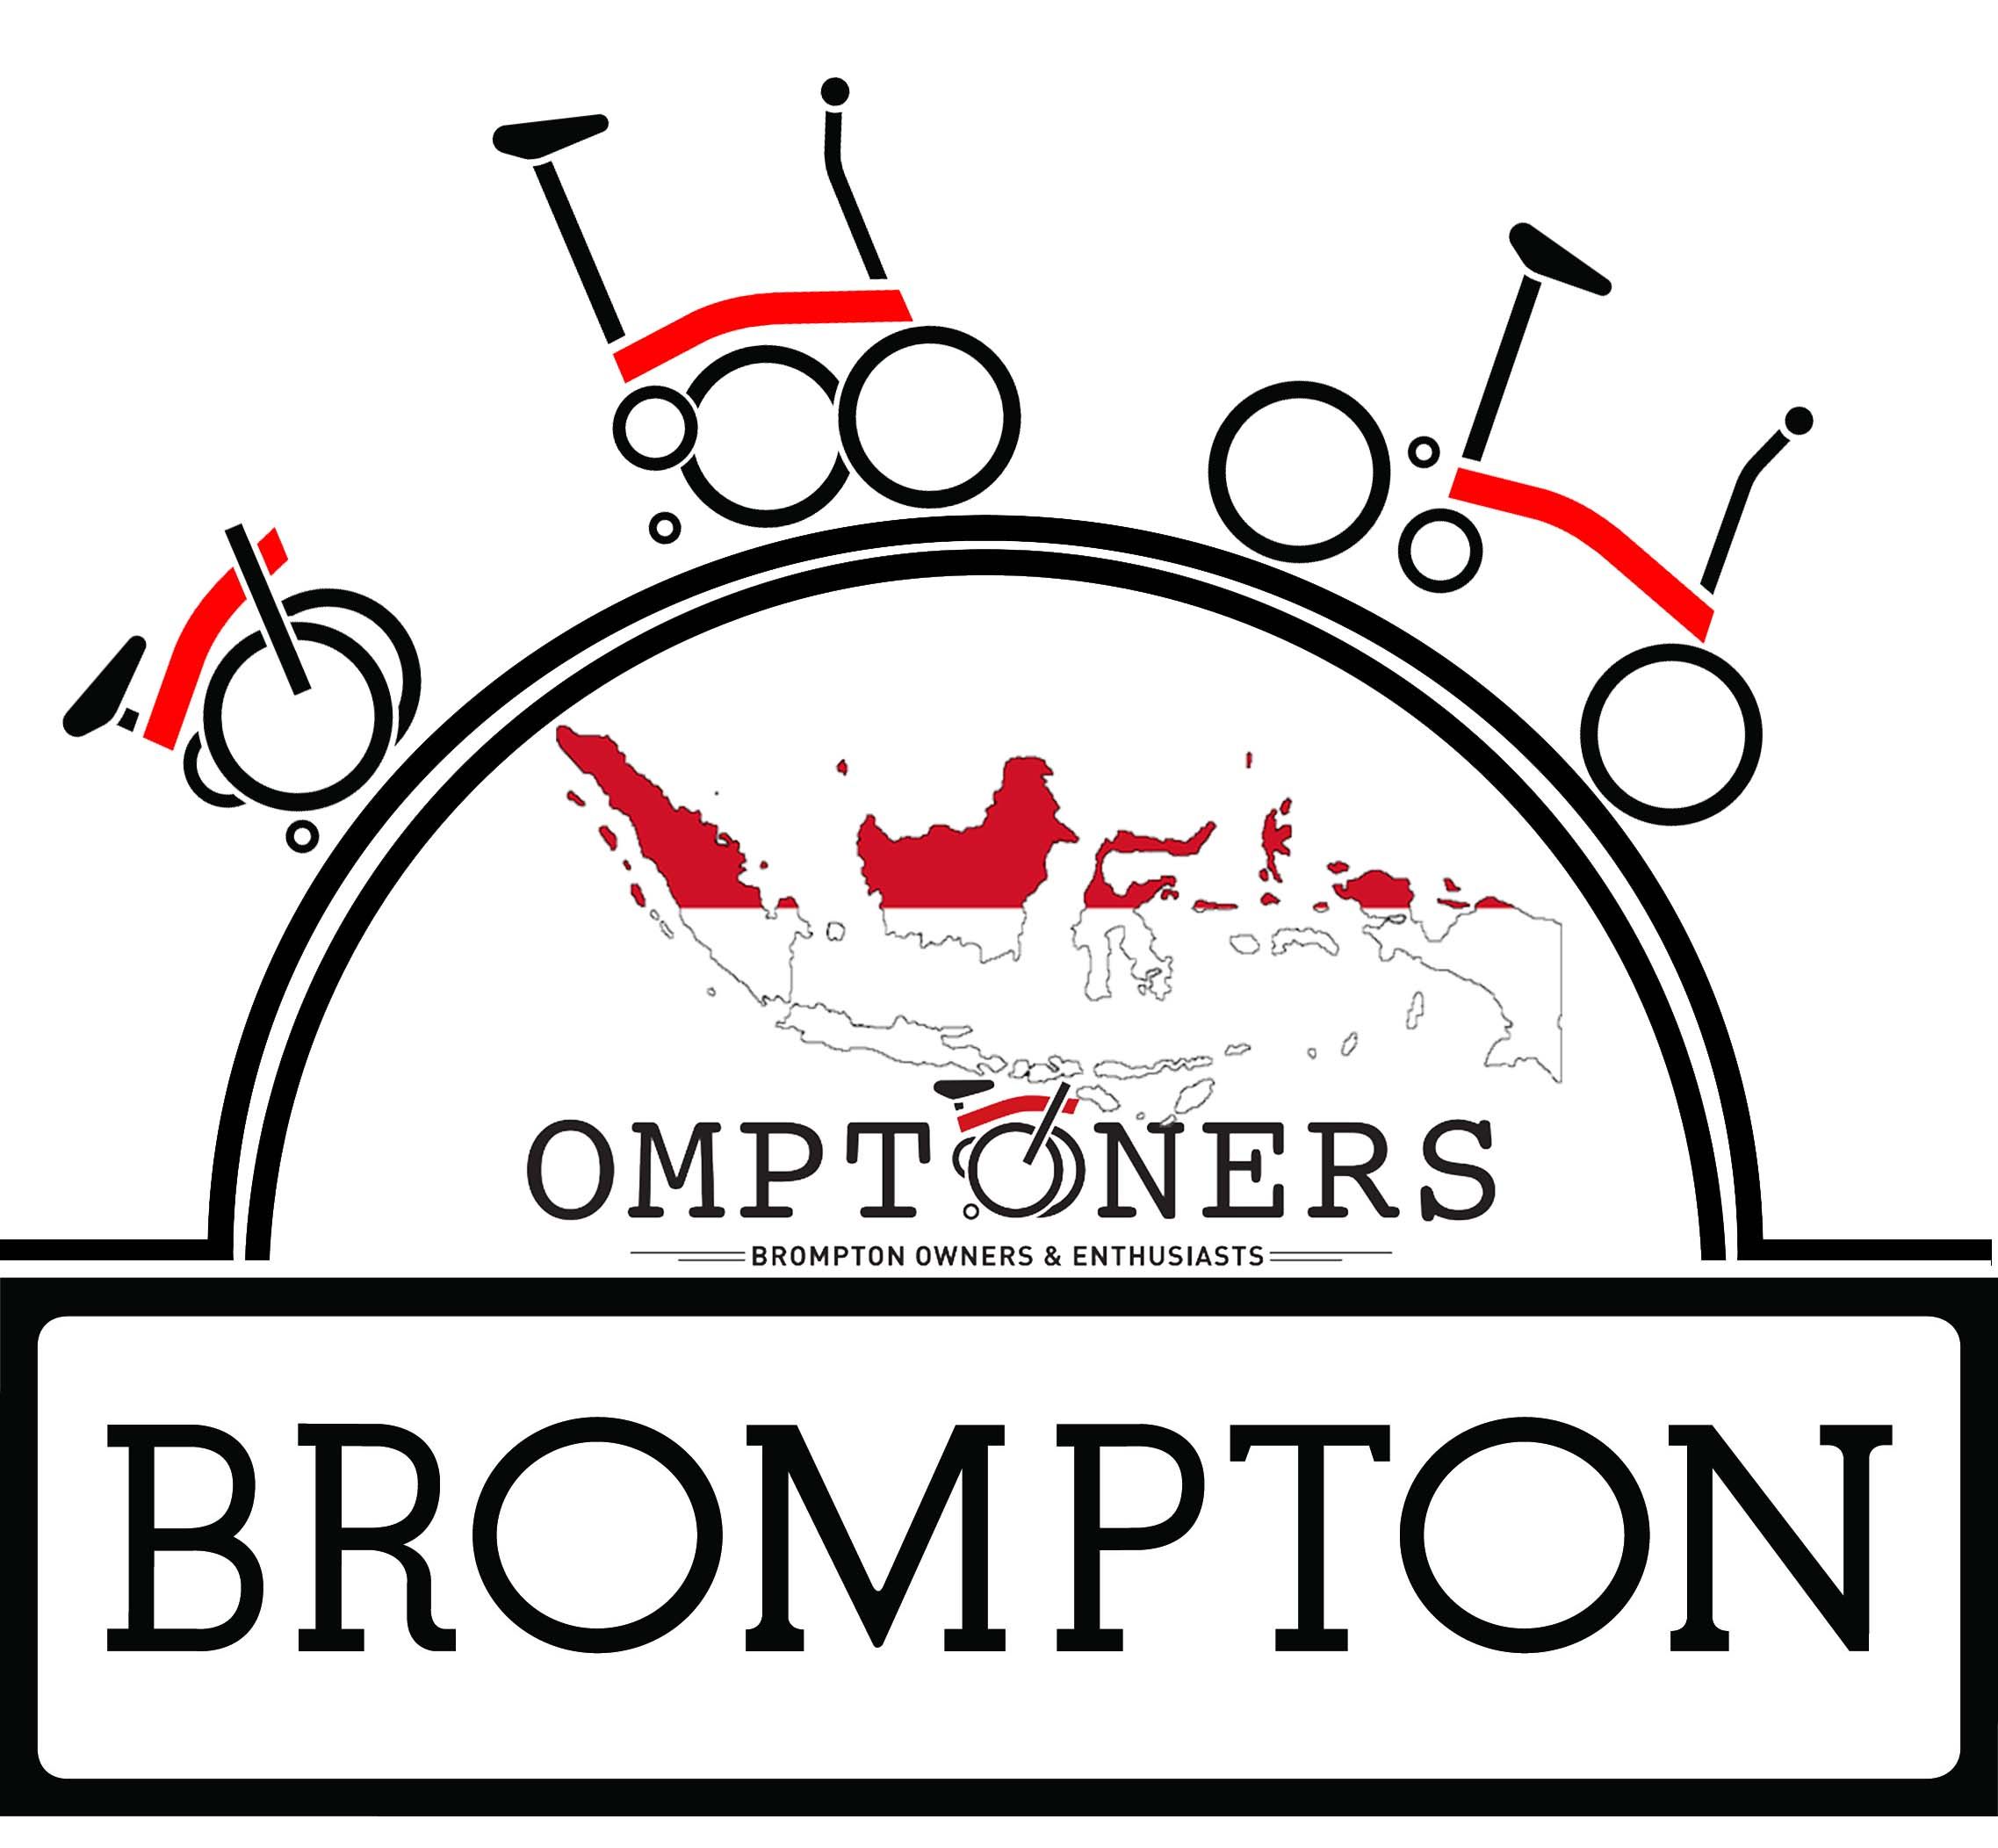 Link to Brompton home page